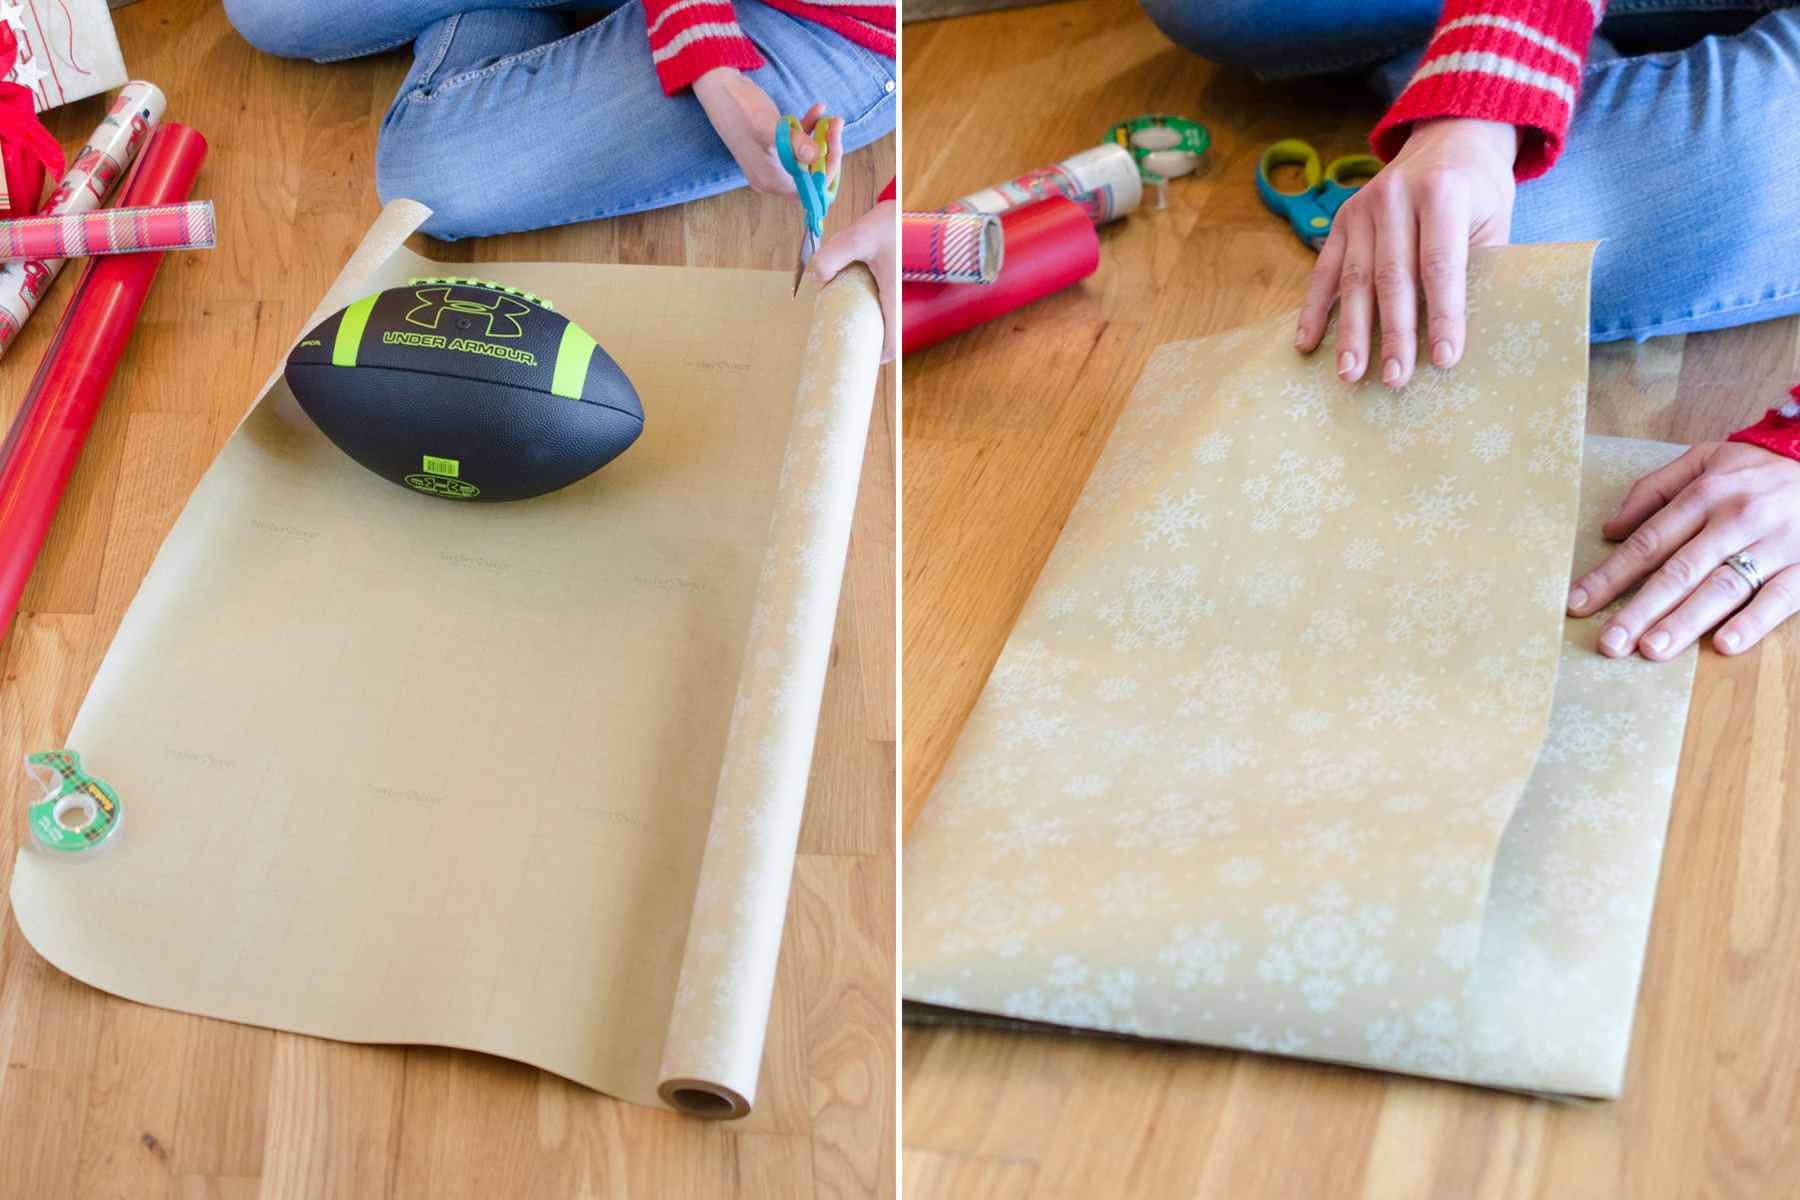 How to Make a Bag Out of Wrapping Paper - The Krazy Coupon Lady